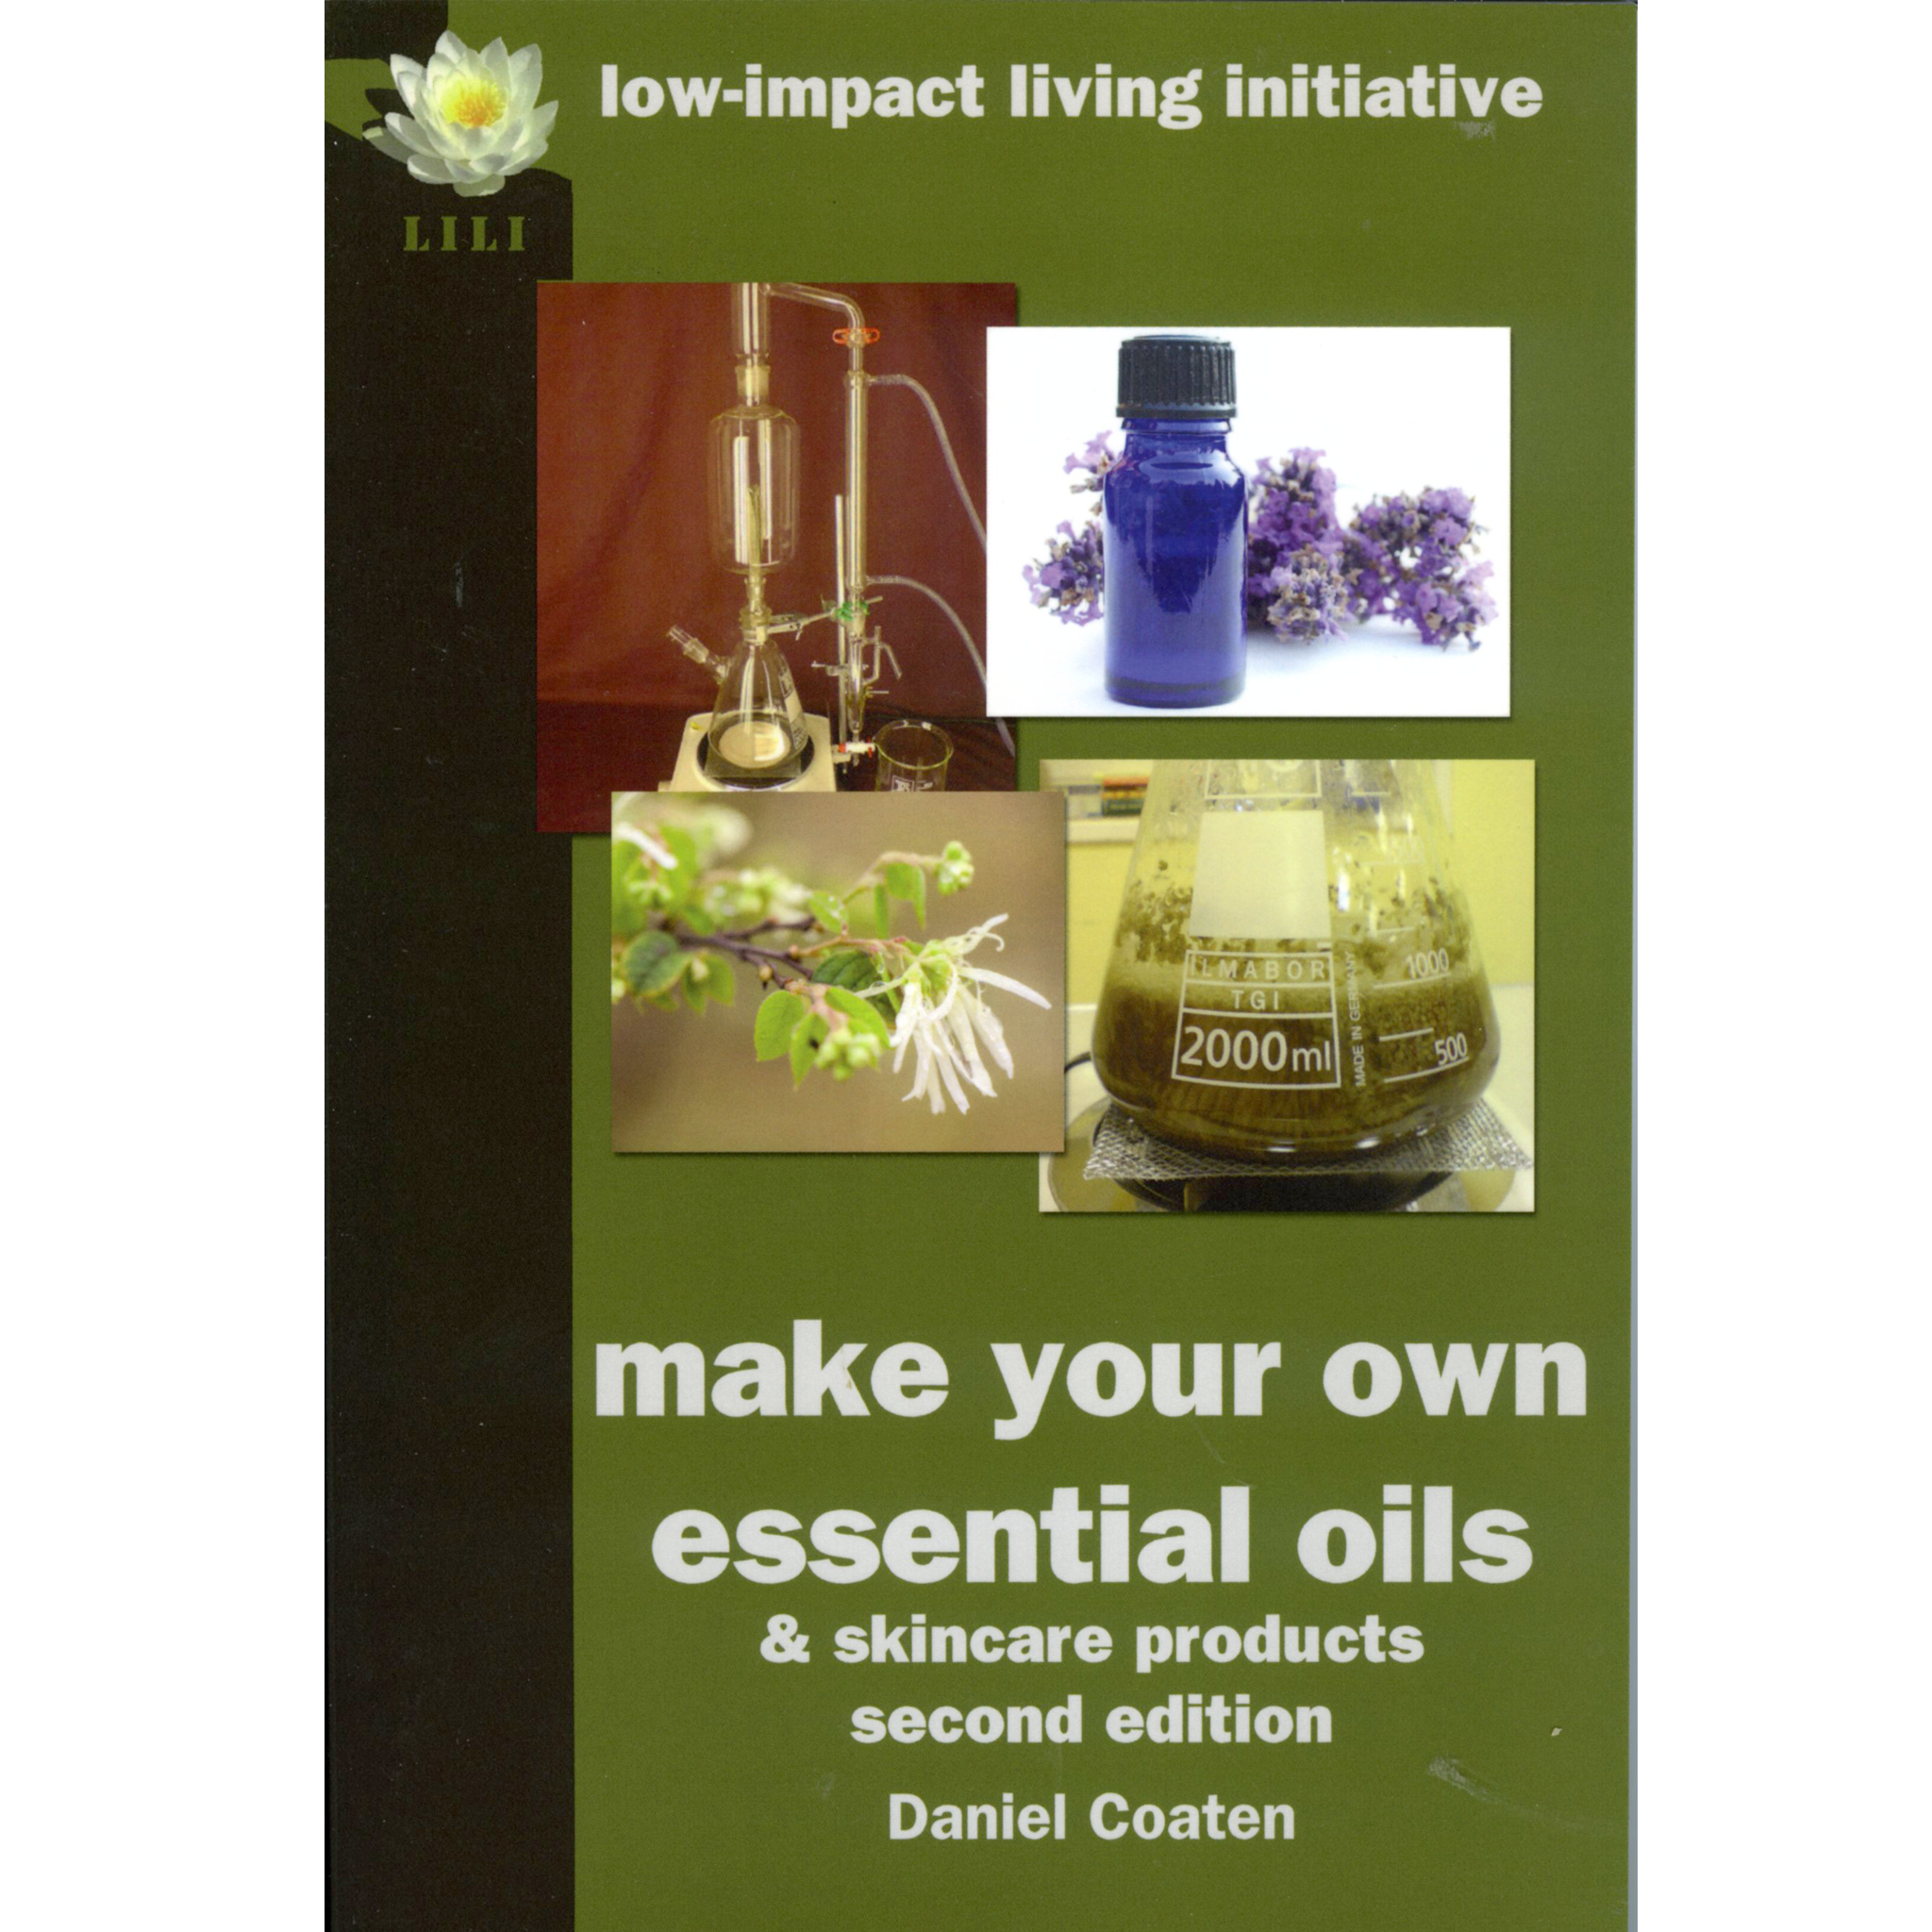 Make your own essential oils & skin-care products